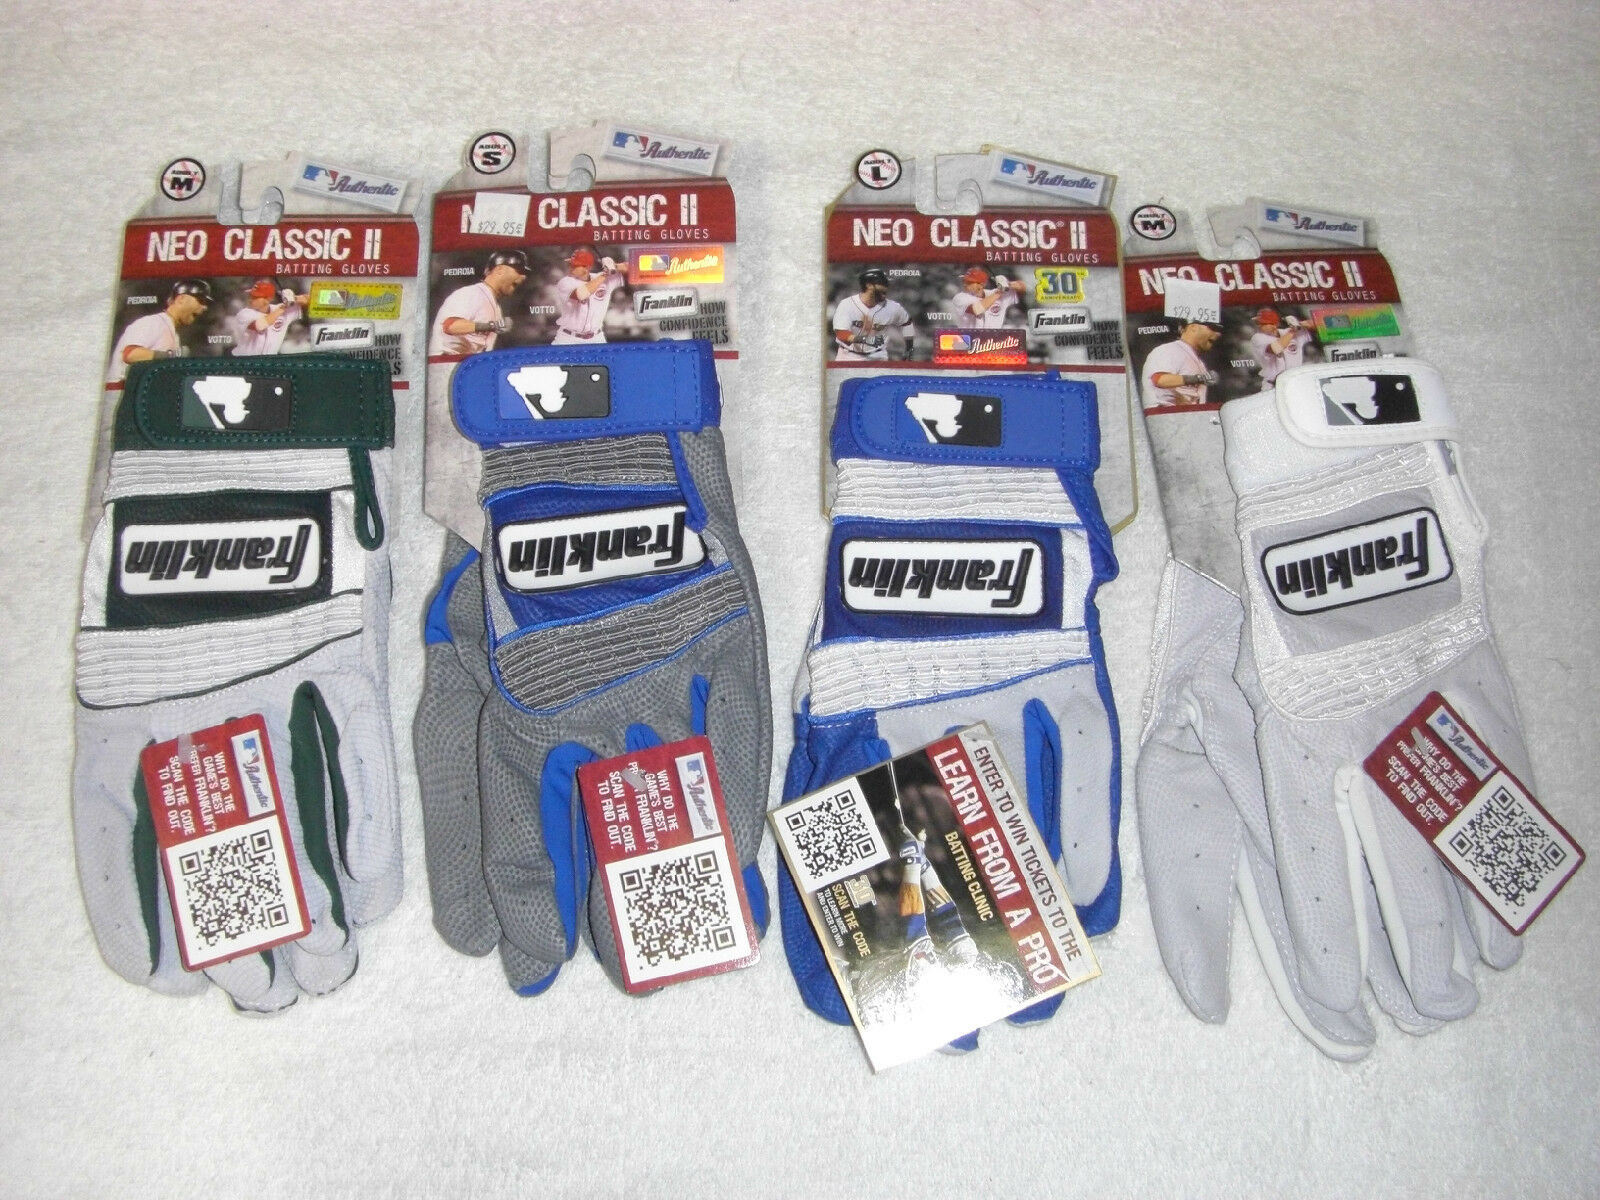 FRANKLIN NEO CLASSIC II BATTING GLOVES - VARIOUS SIZES AND COLORS